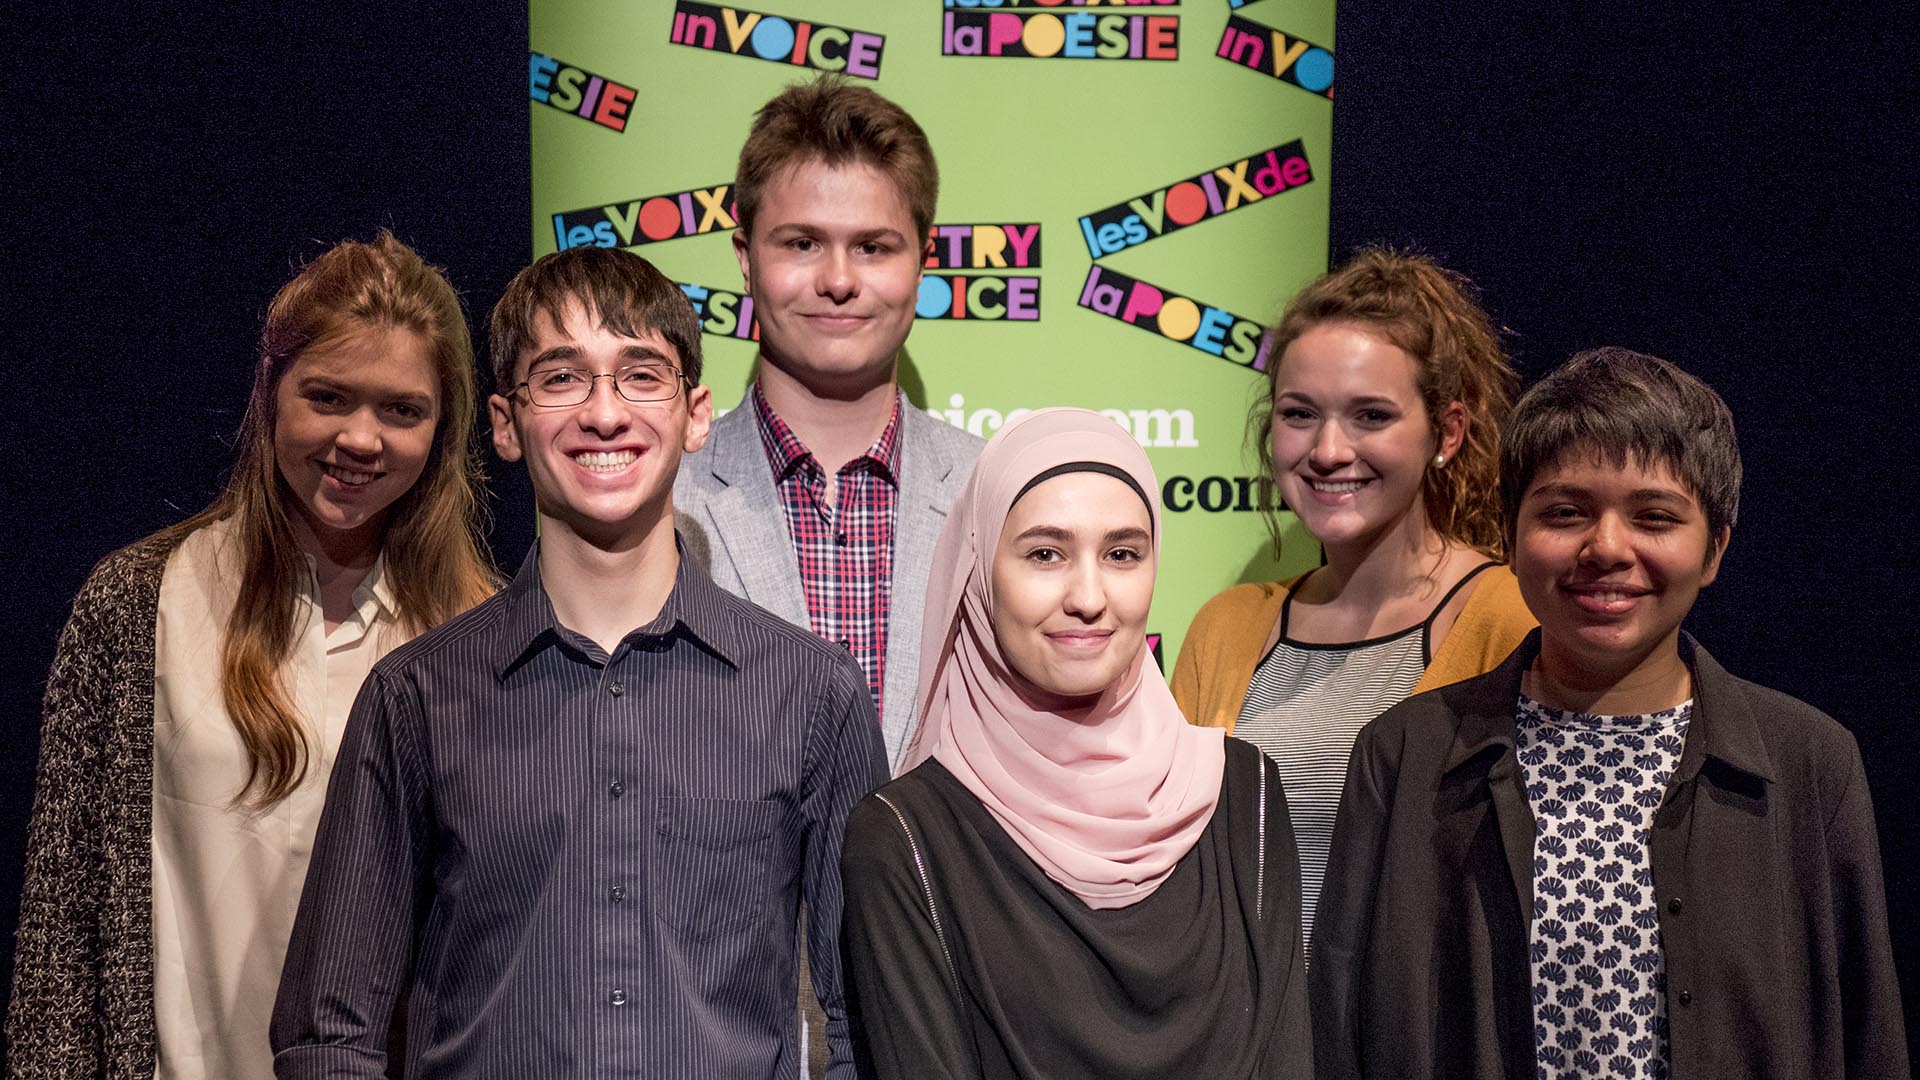 The six students moving on to The English Finals are (l to r): <br /> Charlotte Egan, Mary, Mother of God School, Toronto, ON <br/><br />
Luc Maurer, St. George’s School, Vancouver, BC <br/><br />
Stephen Chankov, University of Toronto Schools, Toronto, ON<br/><br />
Sujood Thraya, Edmonton Islamic Academy, Edmonton, AB<br/><br />
Chloe Harris, Montague Regional High School, Montague, PE<br/><br />
Marissa Prado, Little Flower Academy, Vancouver, BC<br/>